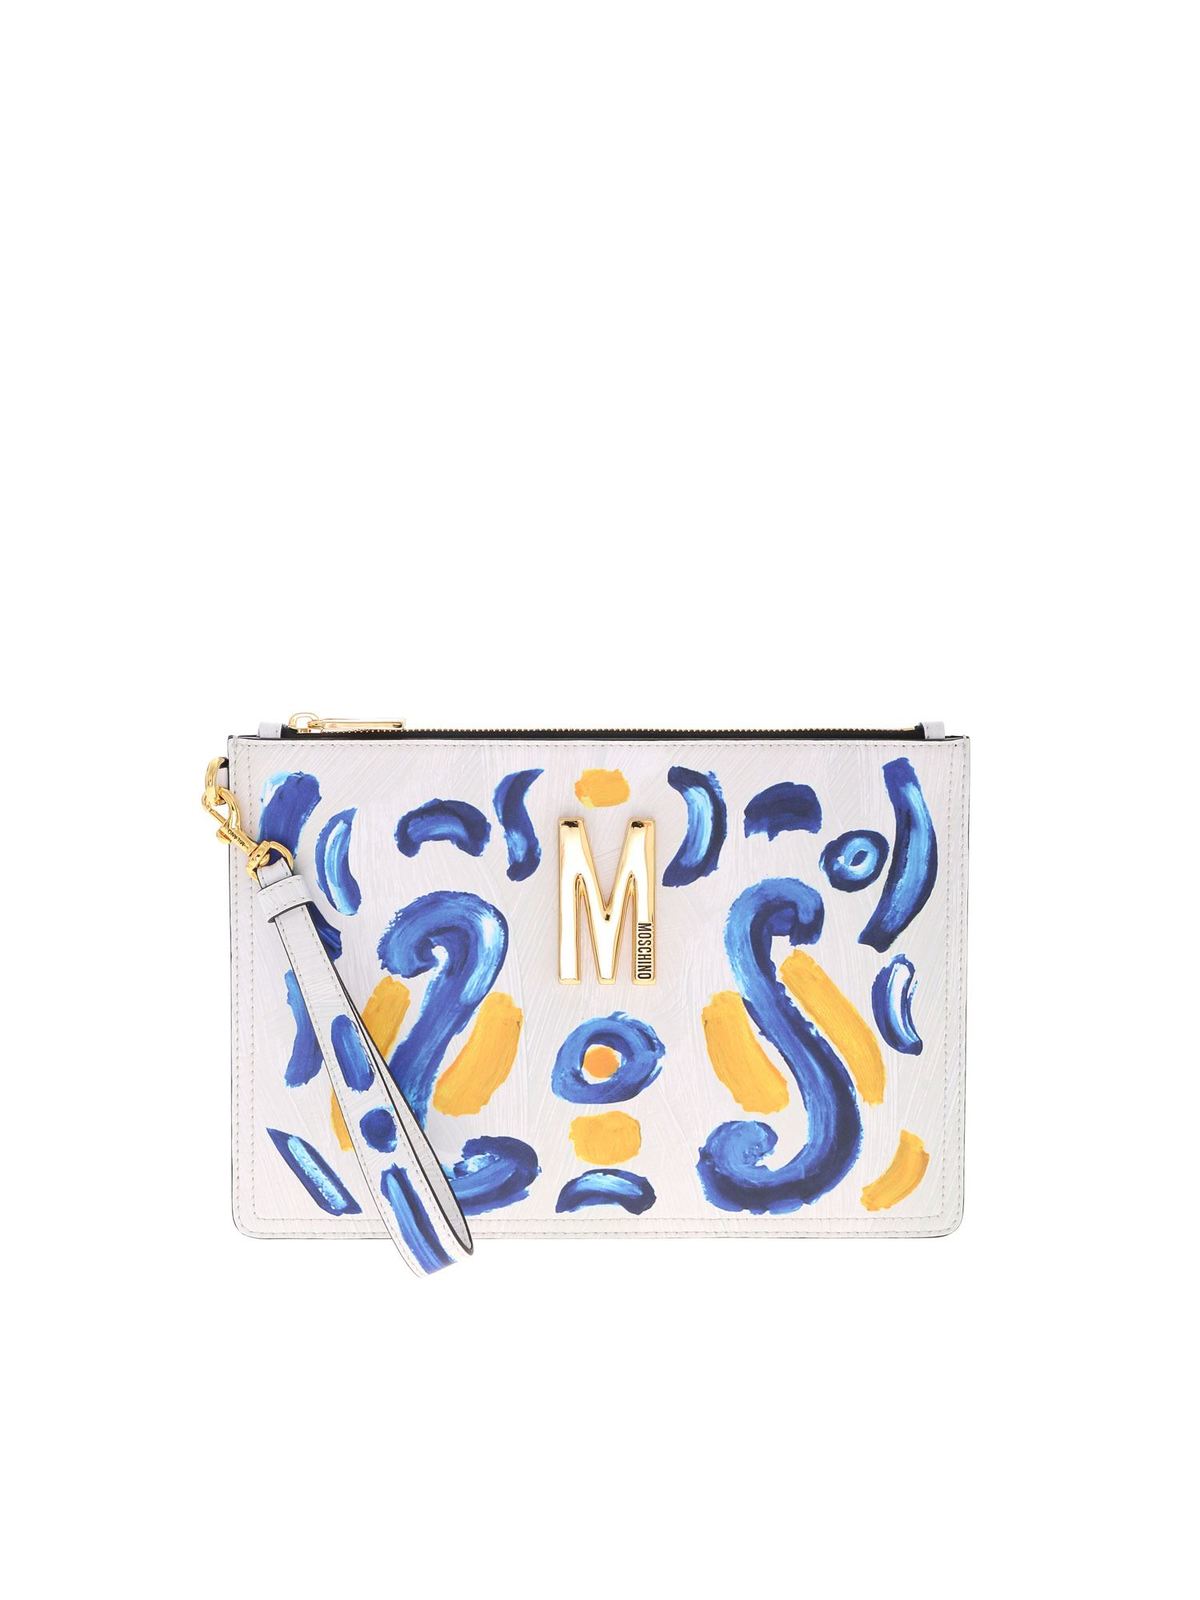 MOSCHINO MAJOLICA PRINT CLUTCH BAG IN SHADES OF GREY